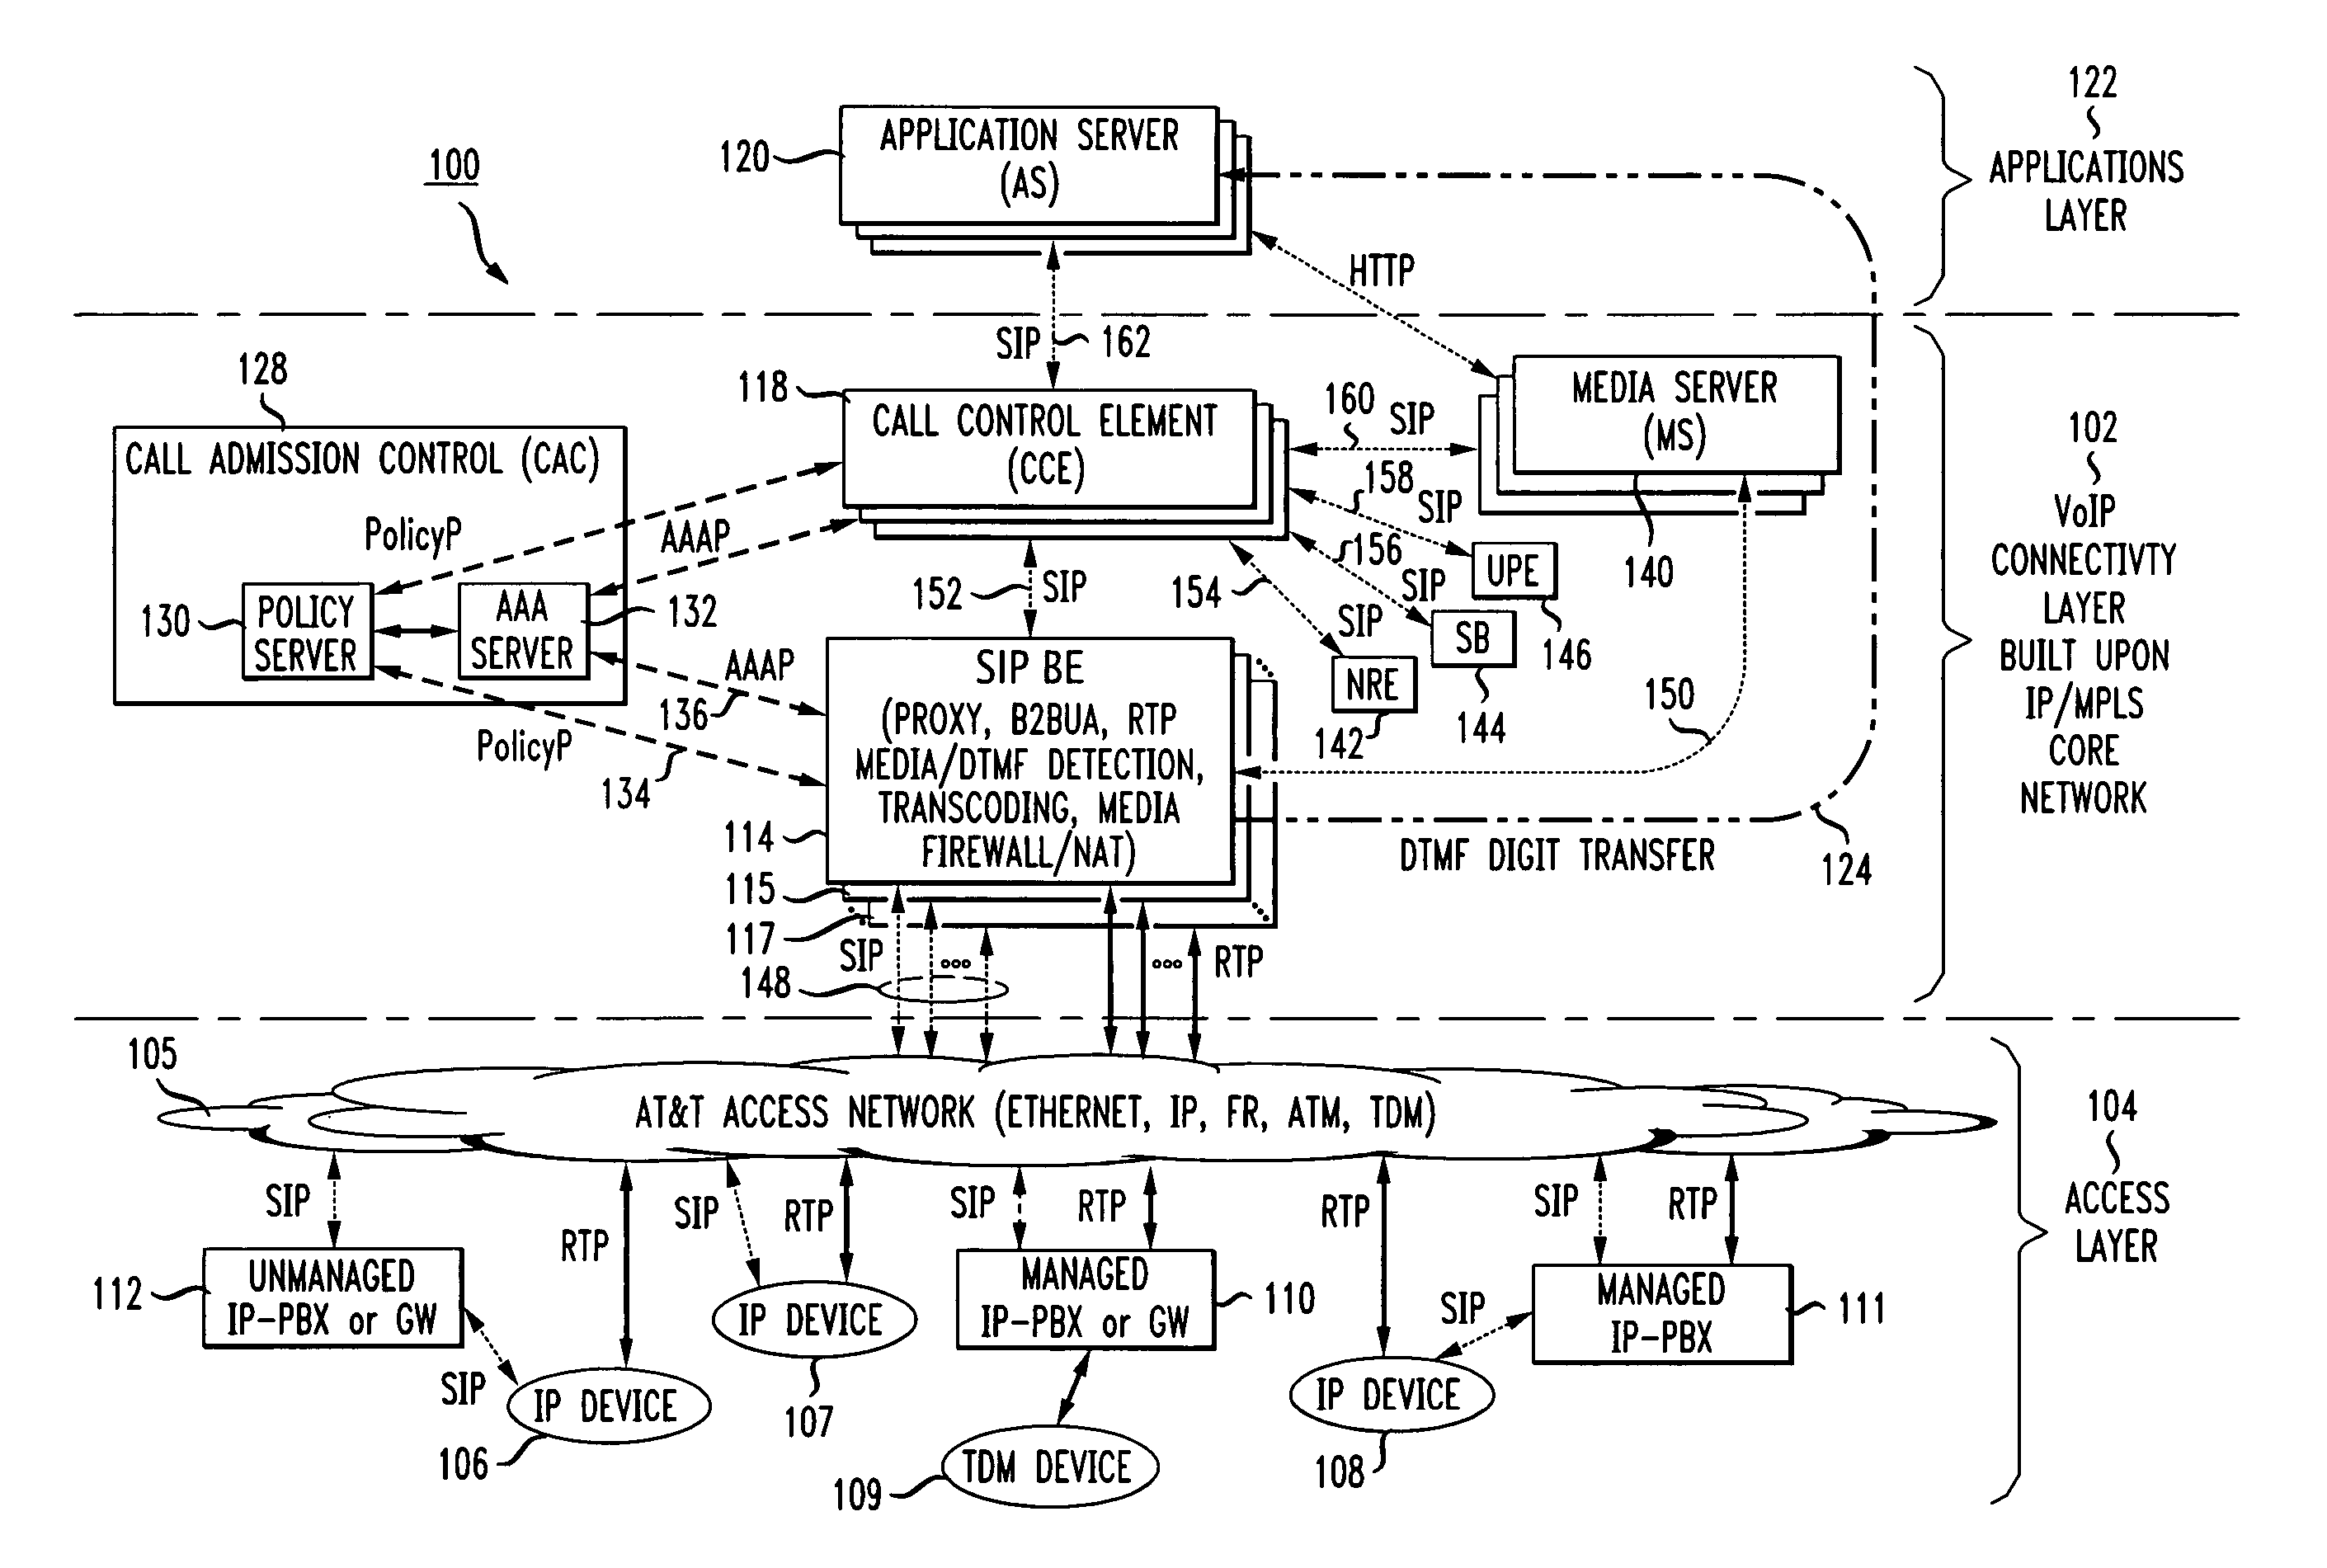 Method and apparatus for functional architecture of voice-over-IP SIP network border element